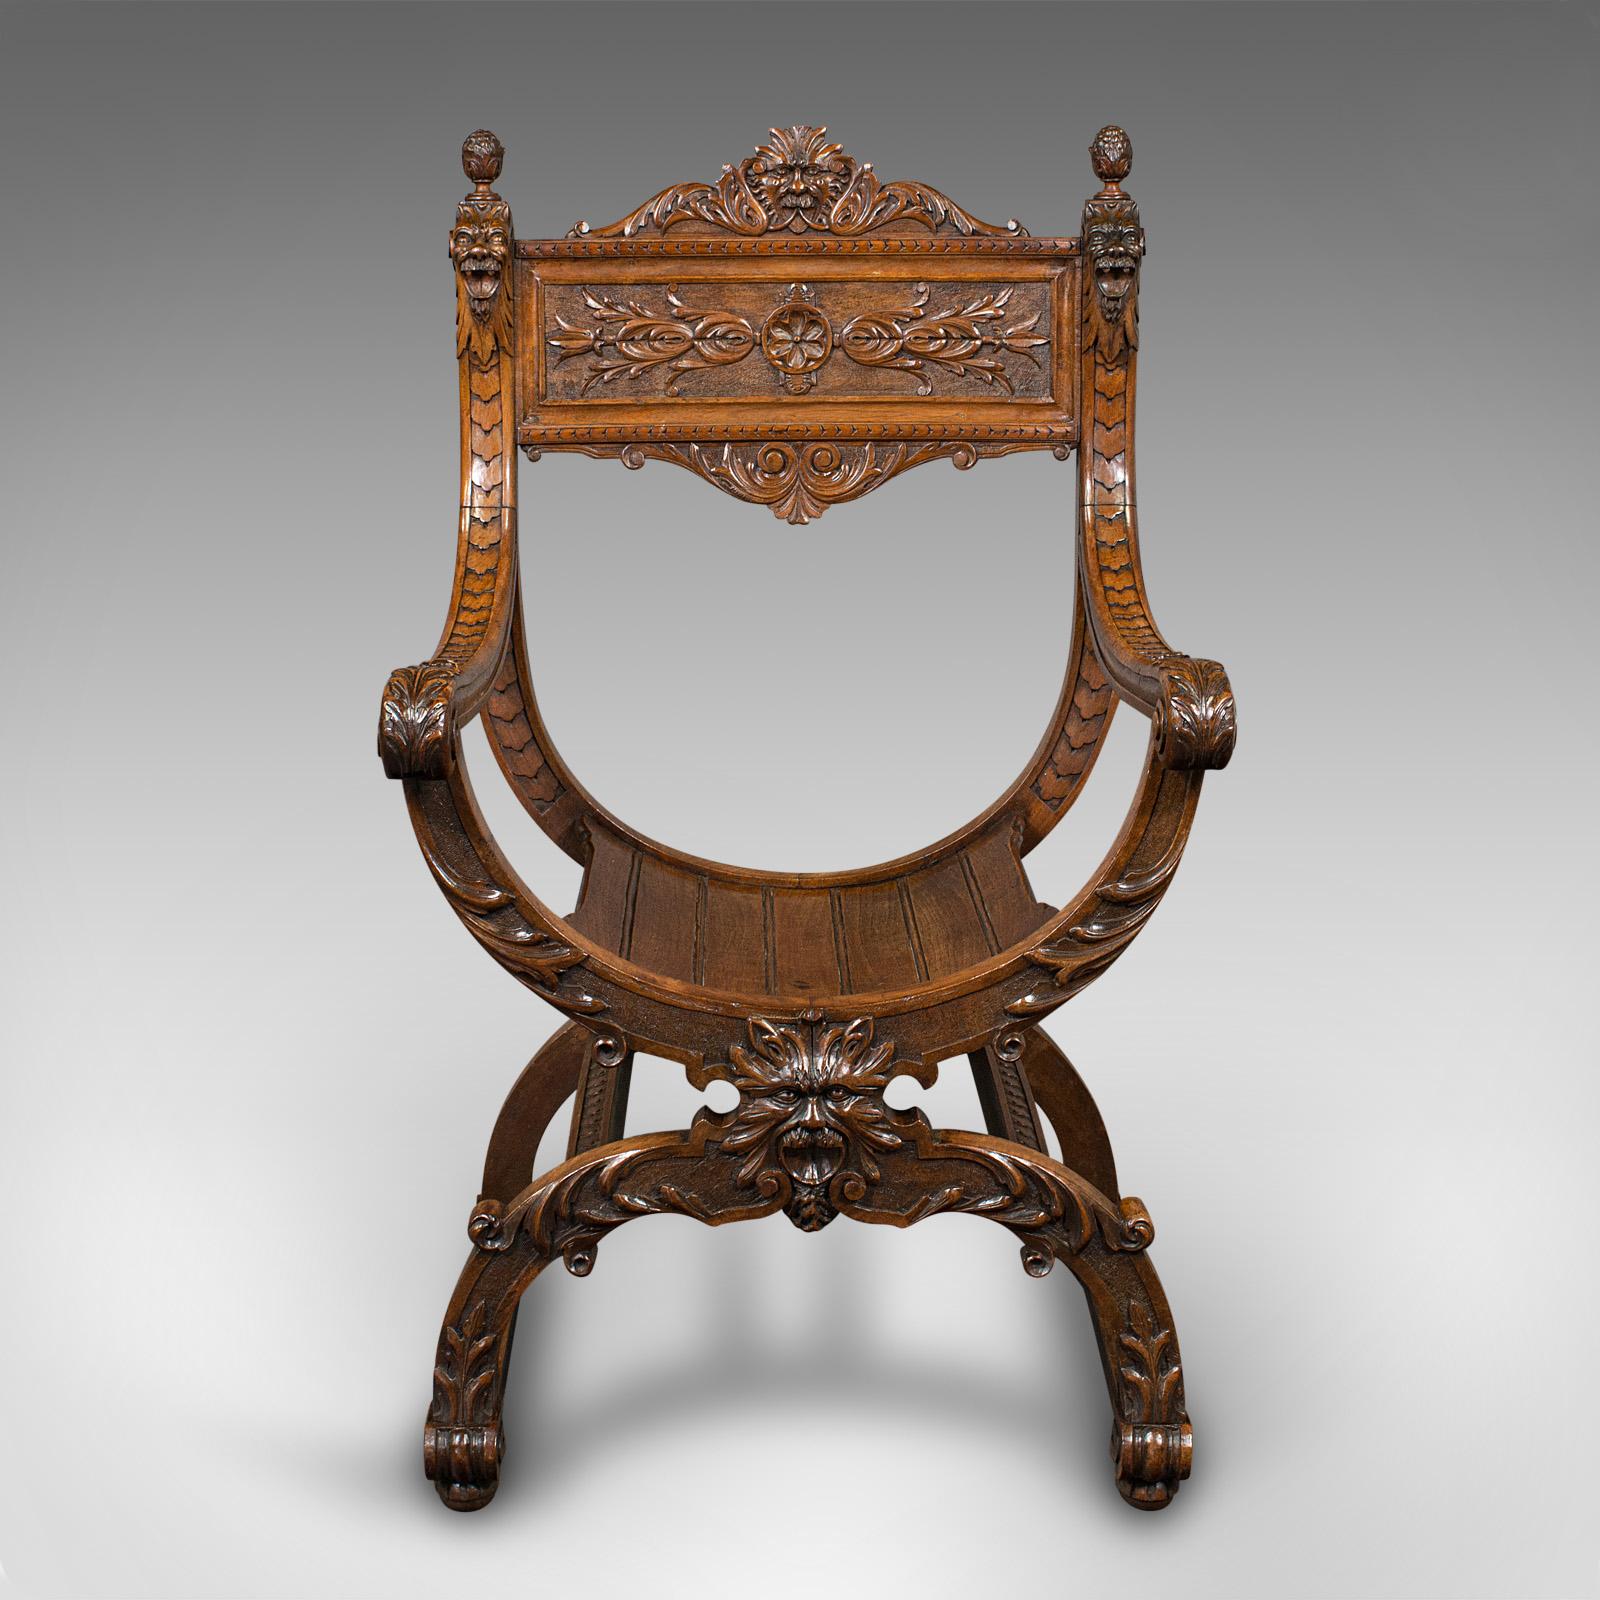 This is an antique Savonarola armchair. An English, walnut seat with overt Gothic revival overtones by James Shoolbred, dating to the Victorian period, circa 1880.

So named for the 15th century Italian Dominican priest Girolamo Savonarola, the